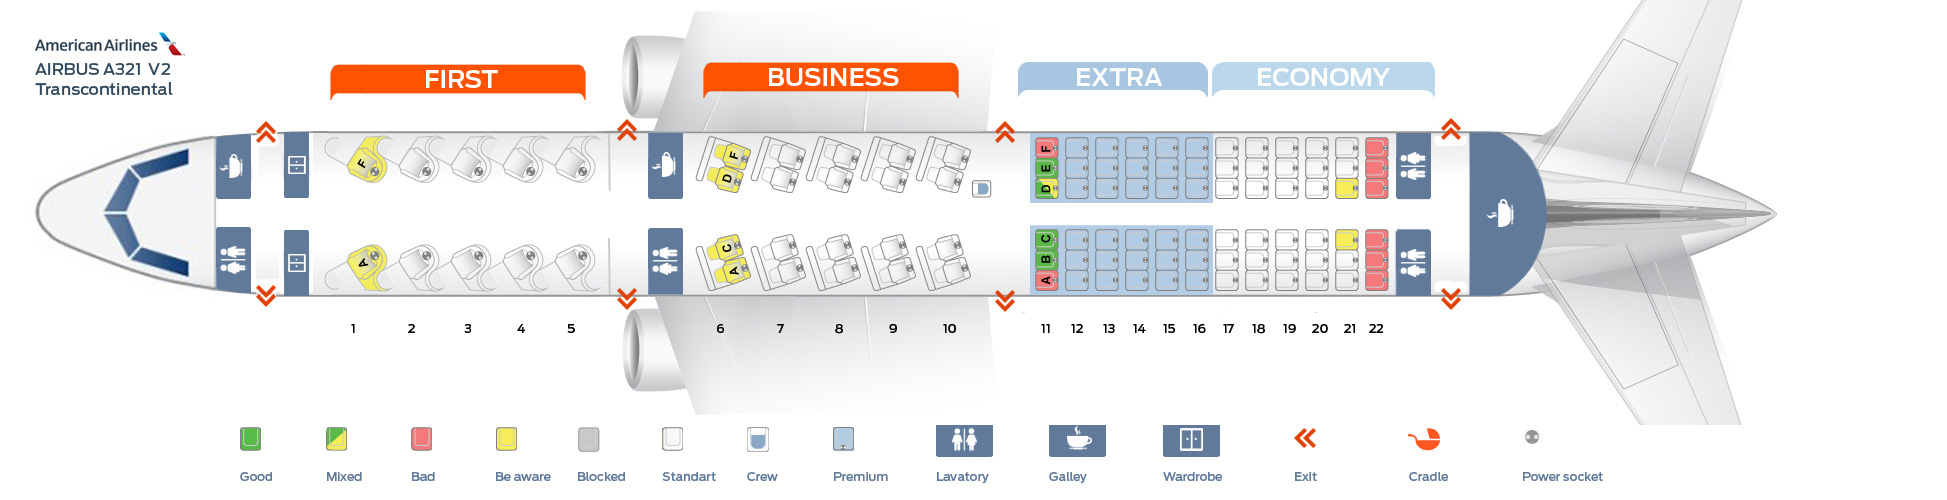 Seat map of the Airbus A321 American Airlines